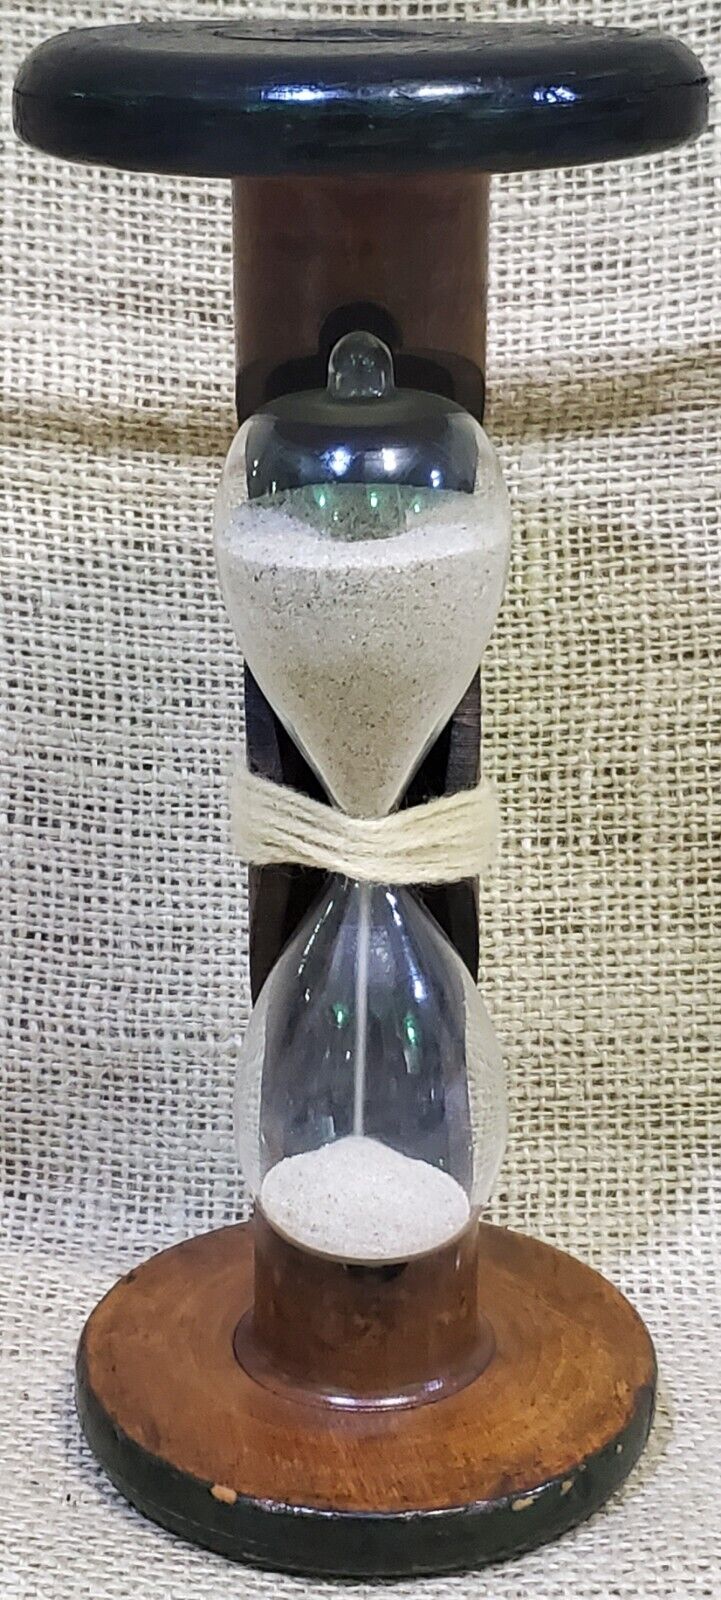 Antique Sand Hourglass Made From Wooden Industrial Style Bobbin 9.25\